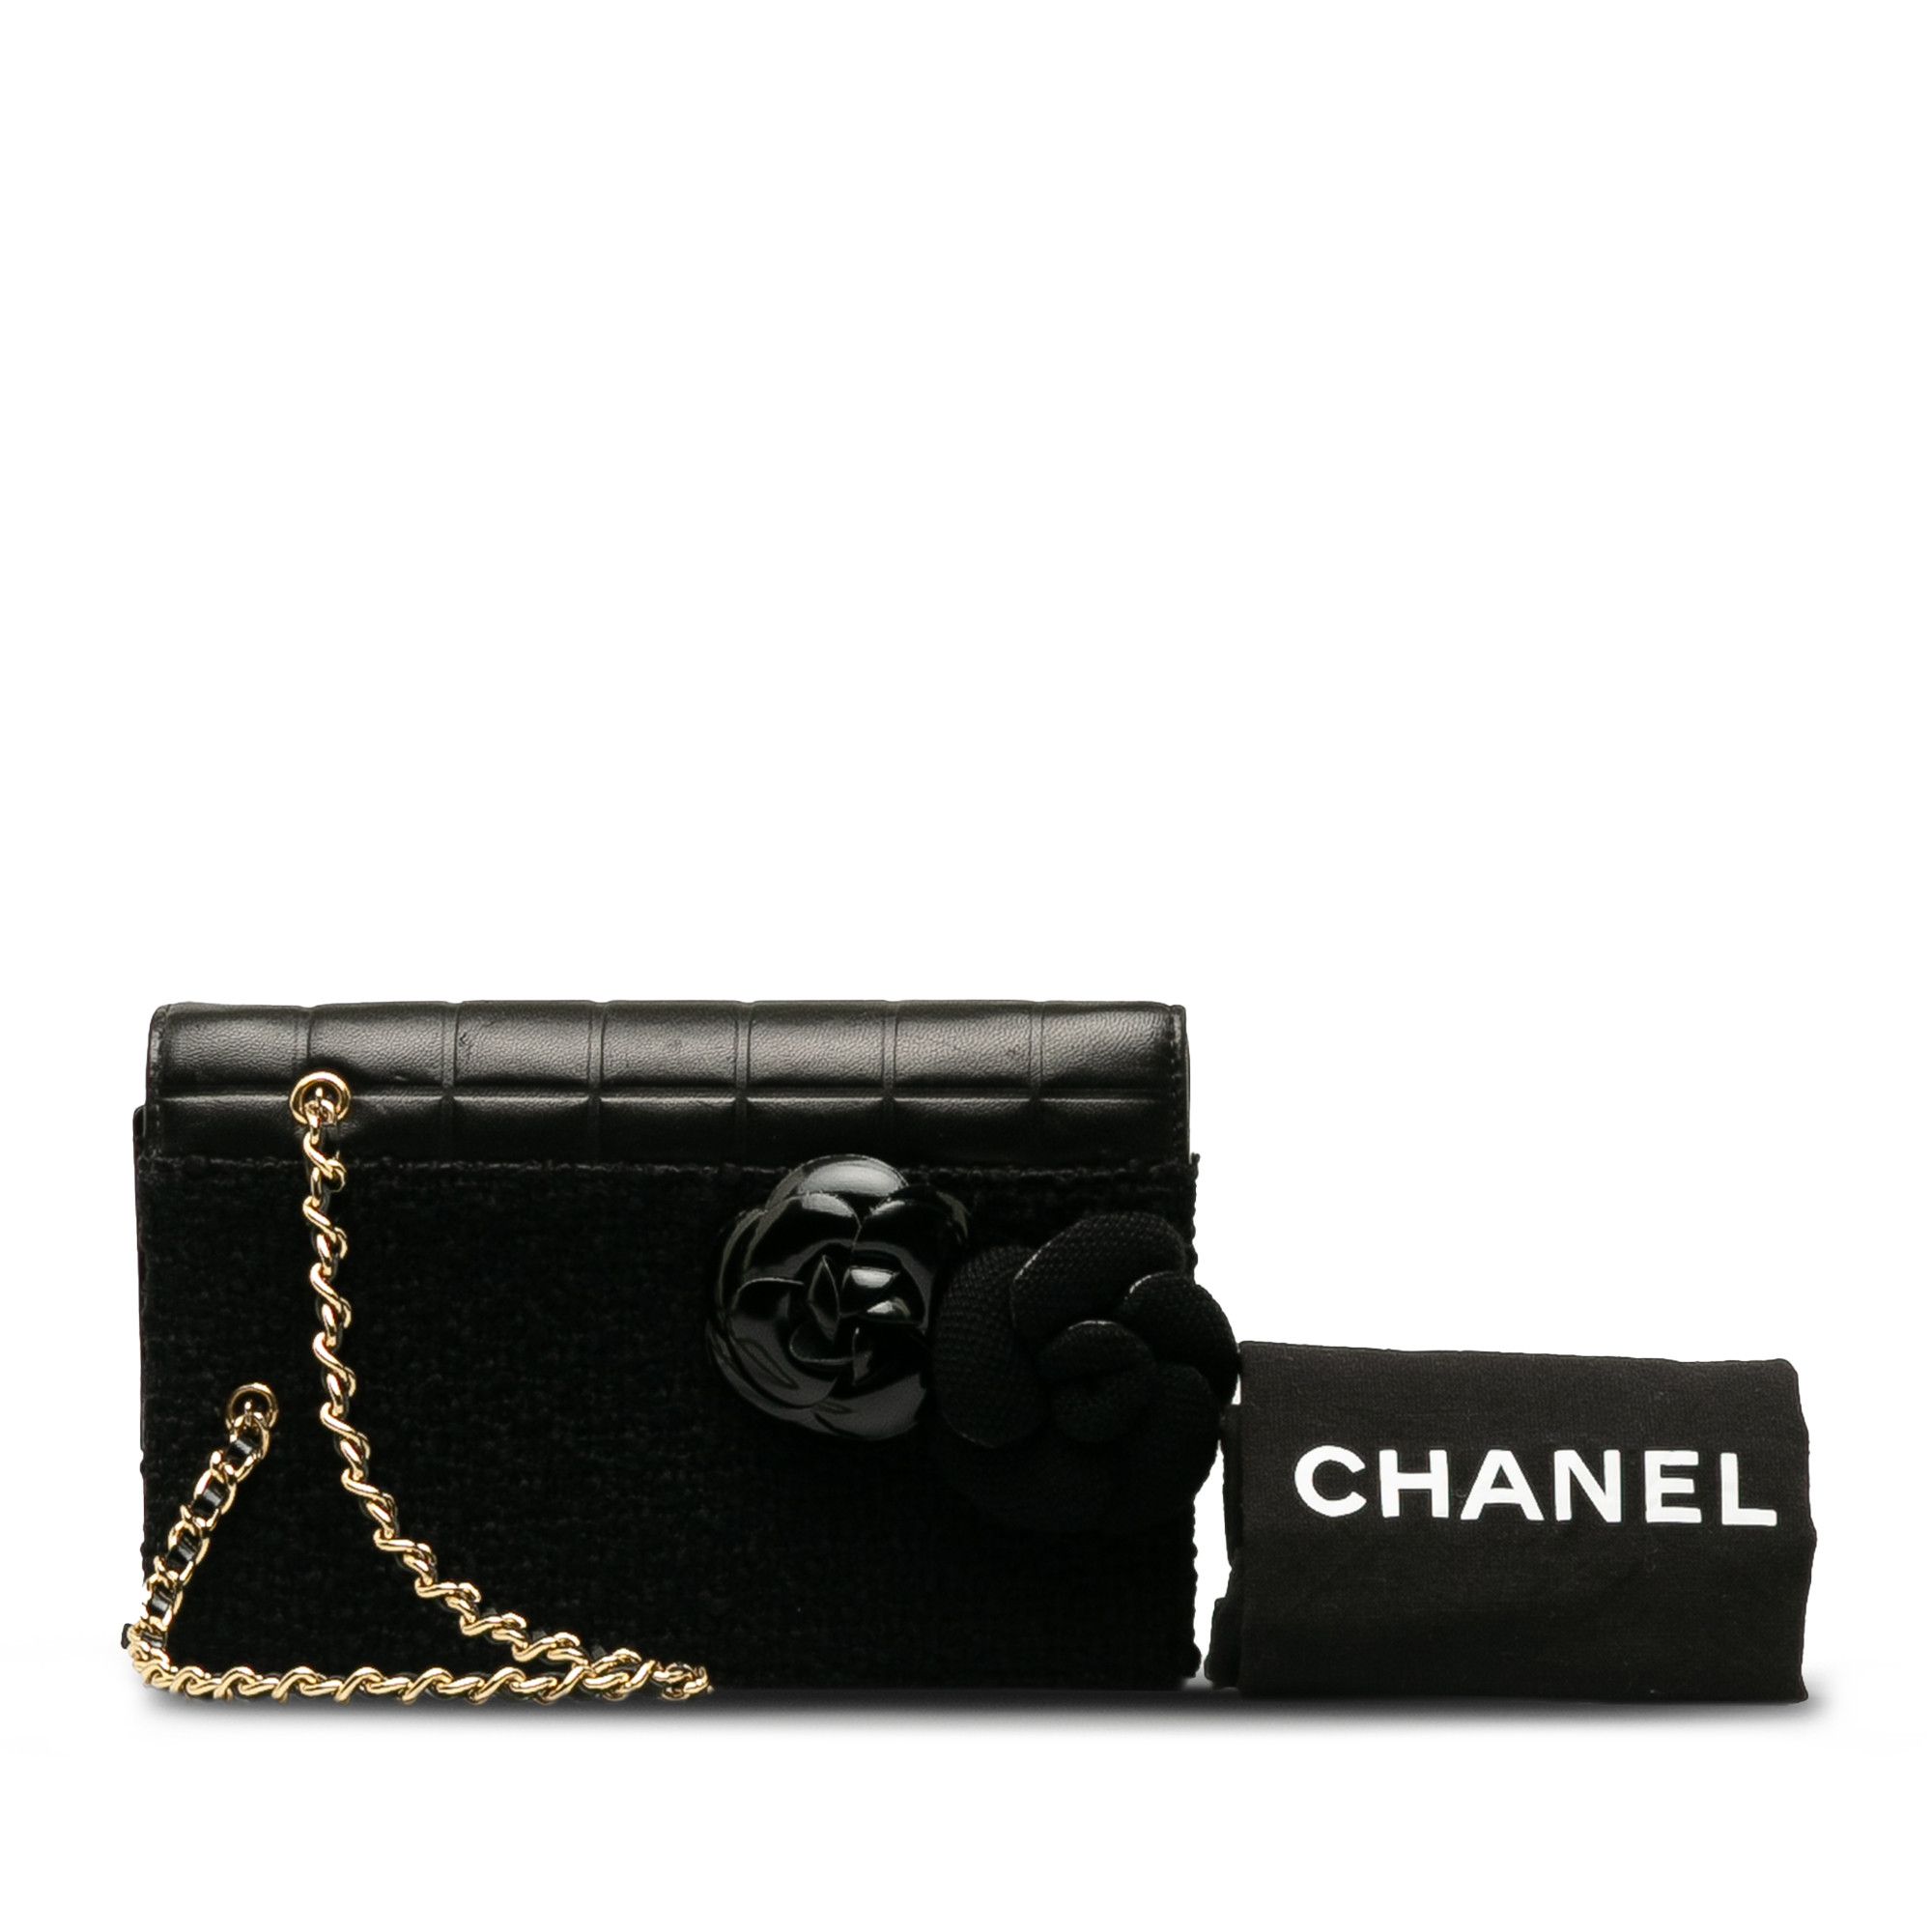 Chanel Chanel Tweed Chocolate Bar Camellia Clutch Size ONE SIZE - 12 Preview